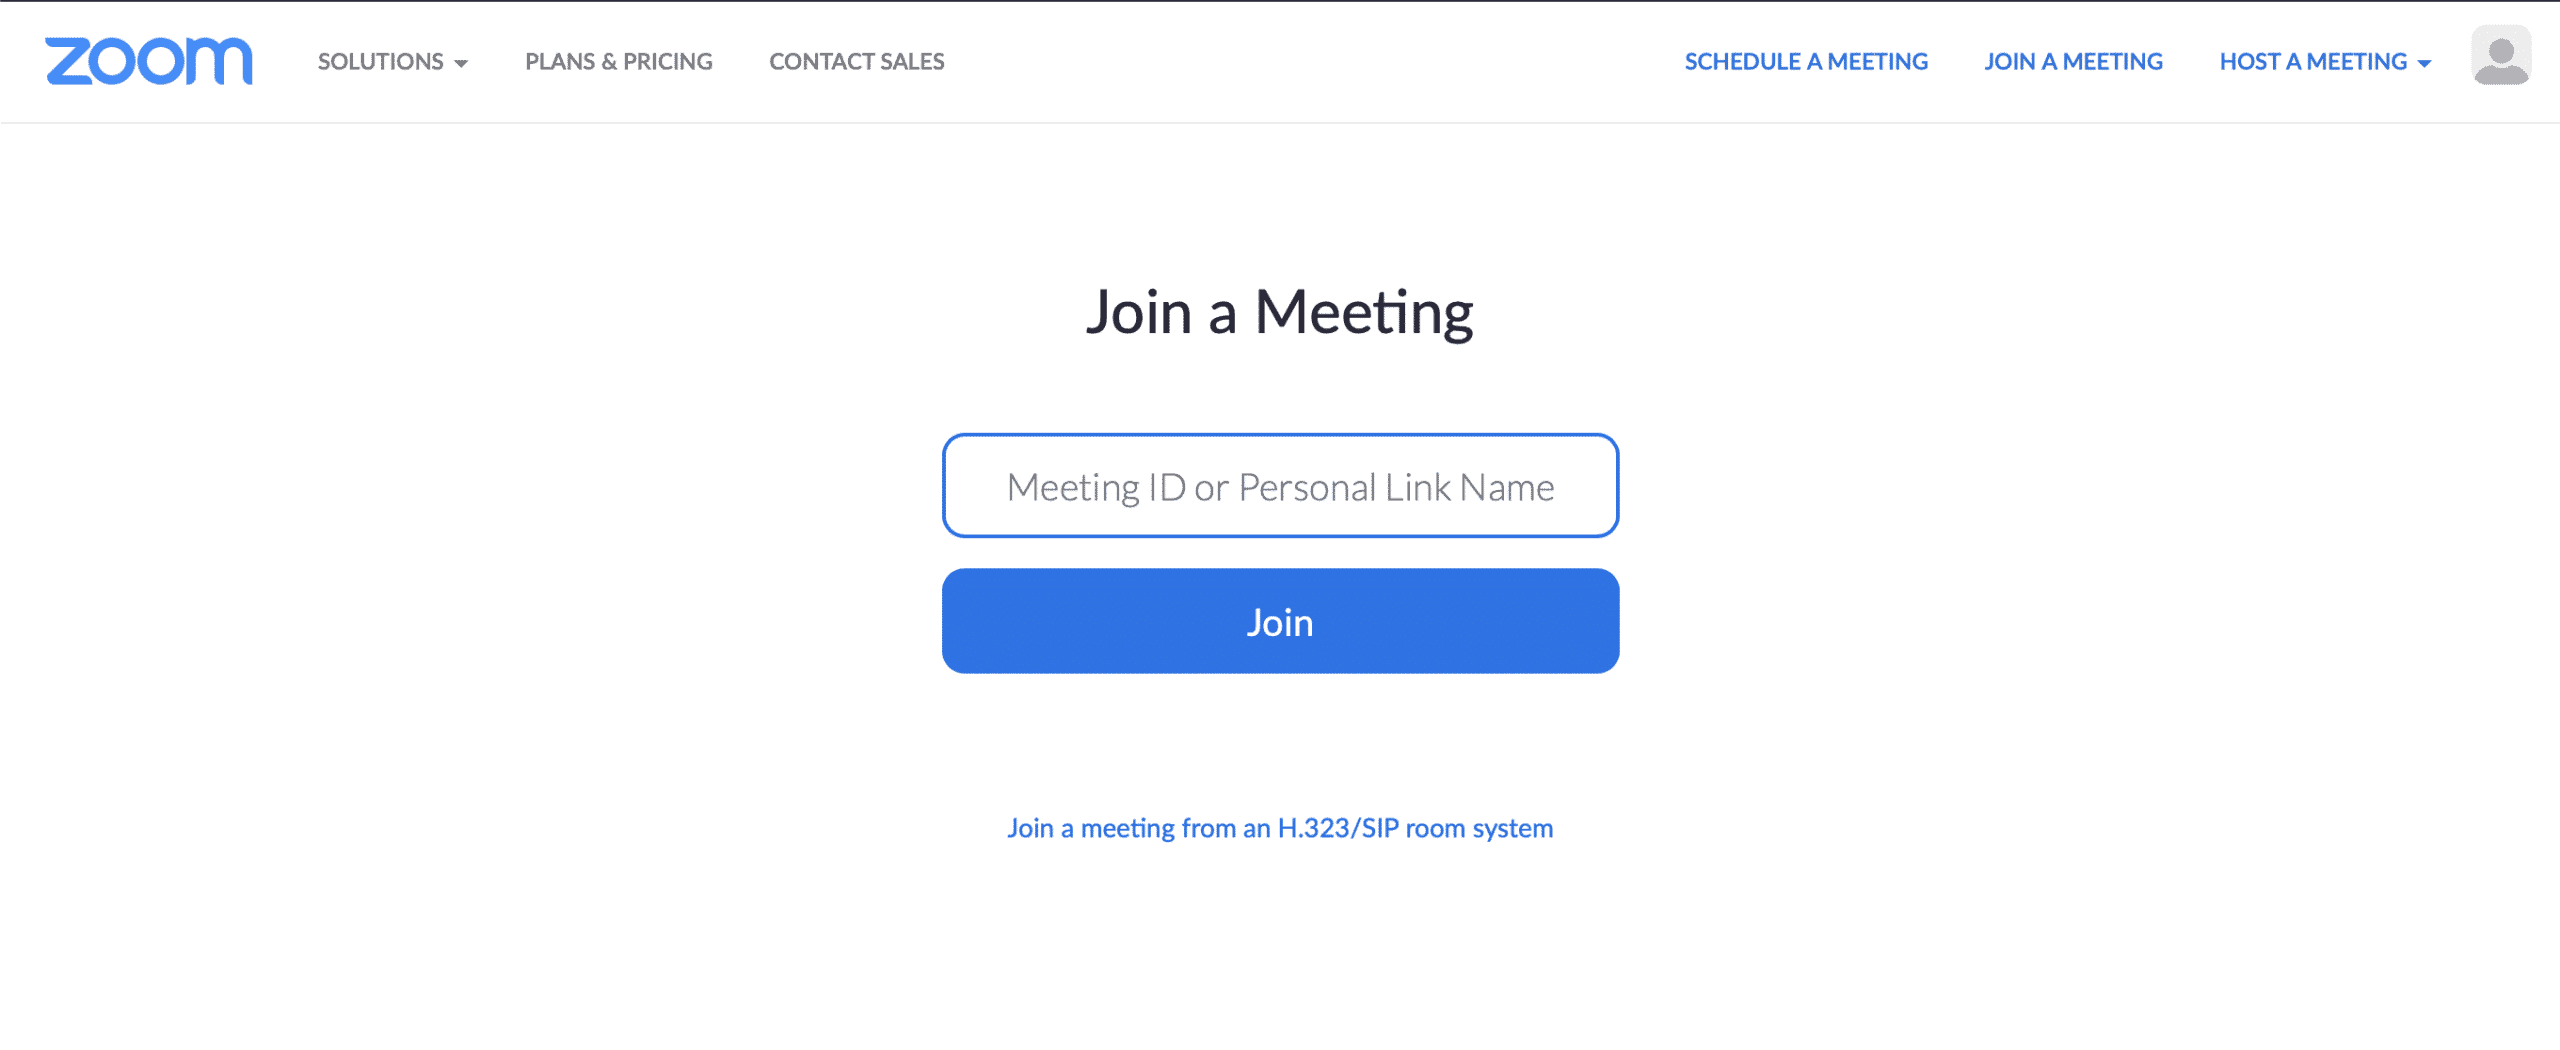 This is how you can easily join a Zoom meeting